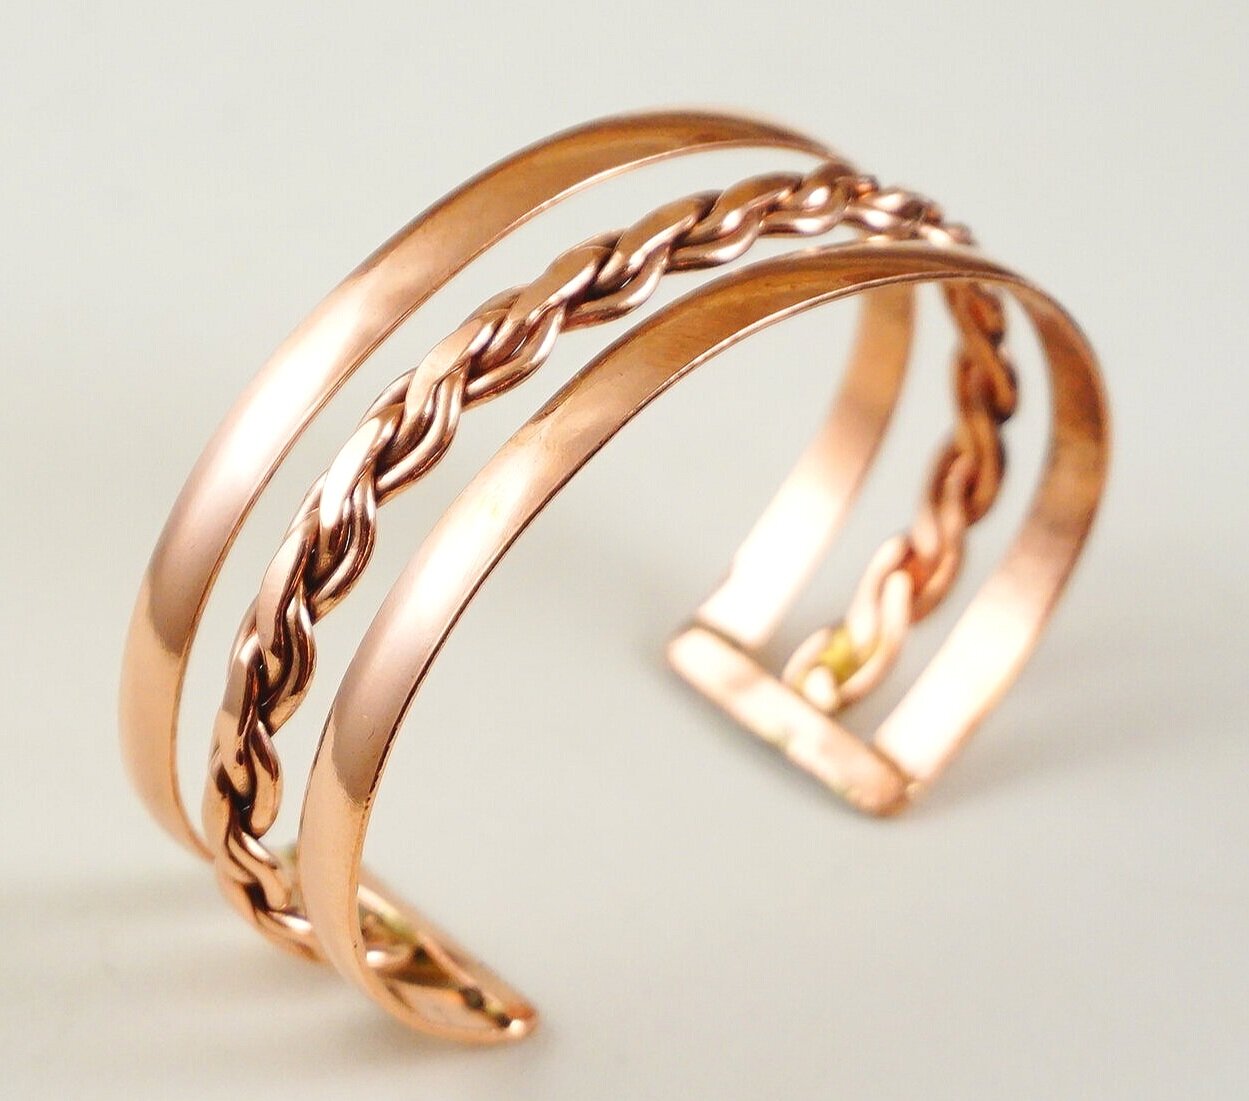 Long Solid Thick Round Indian 3-color Copper Delicately Braided Cuff Bracelet 